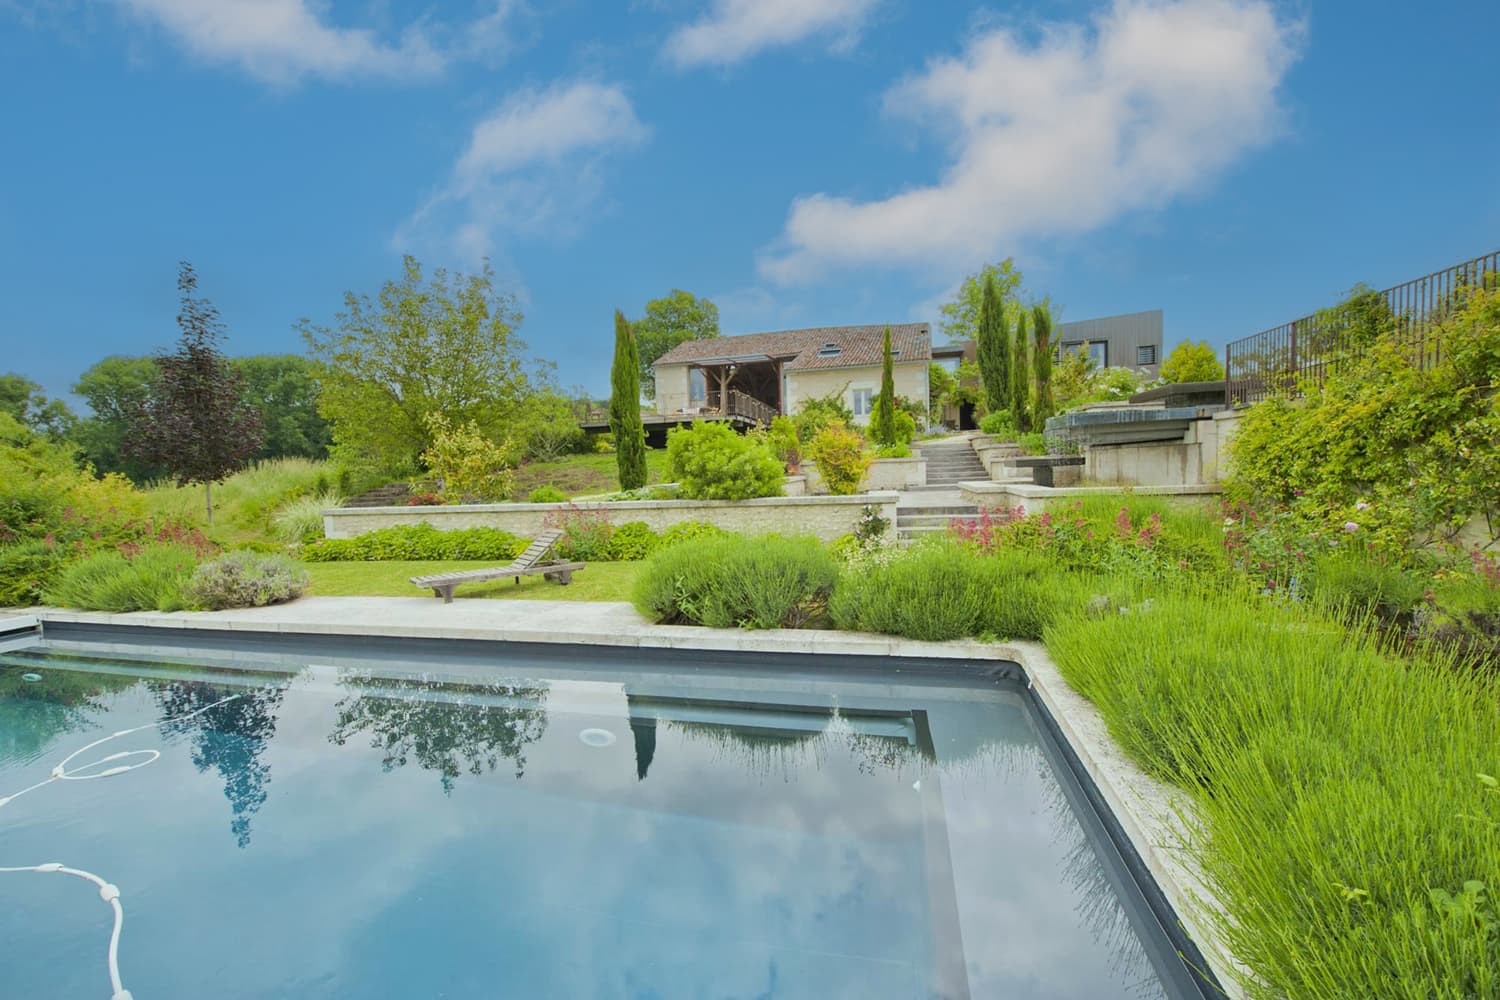 Rental home in Dordogne with private solar heated pool